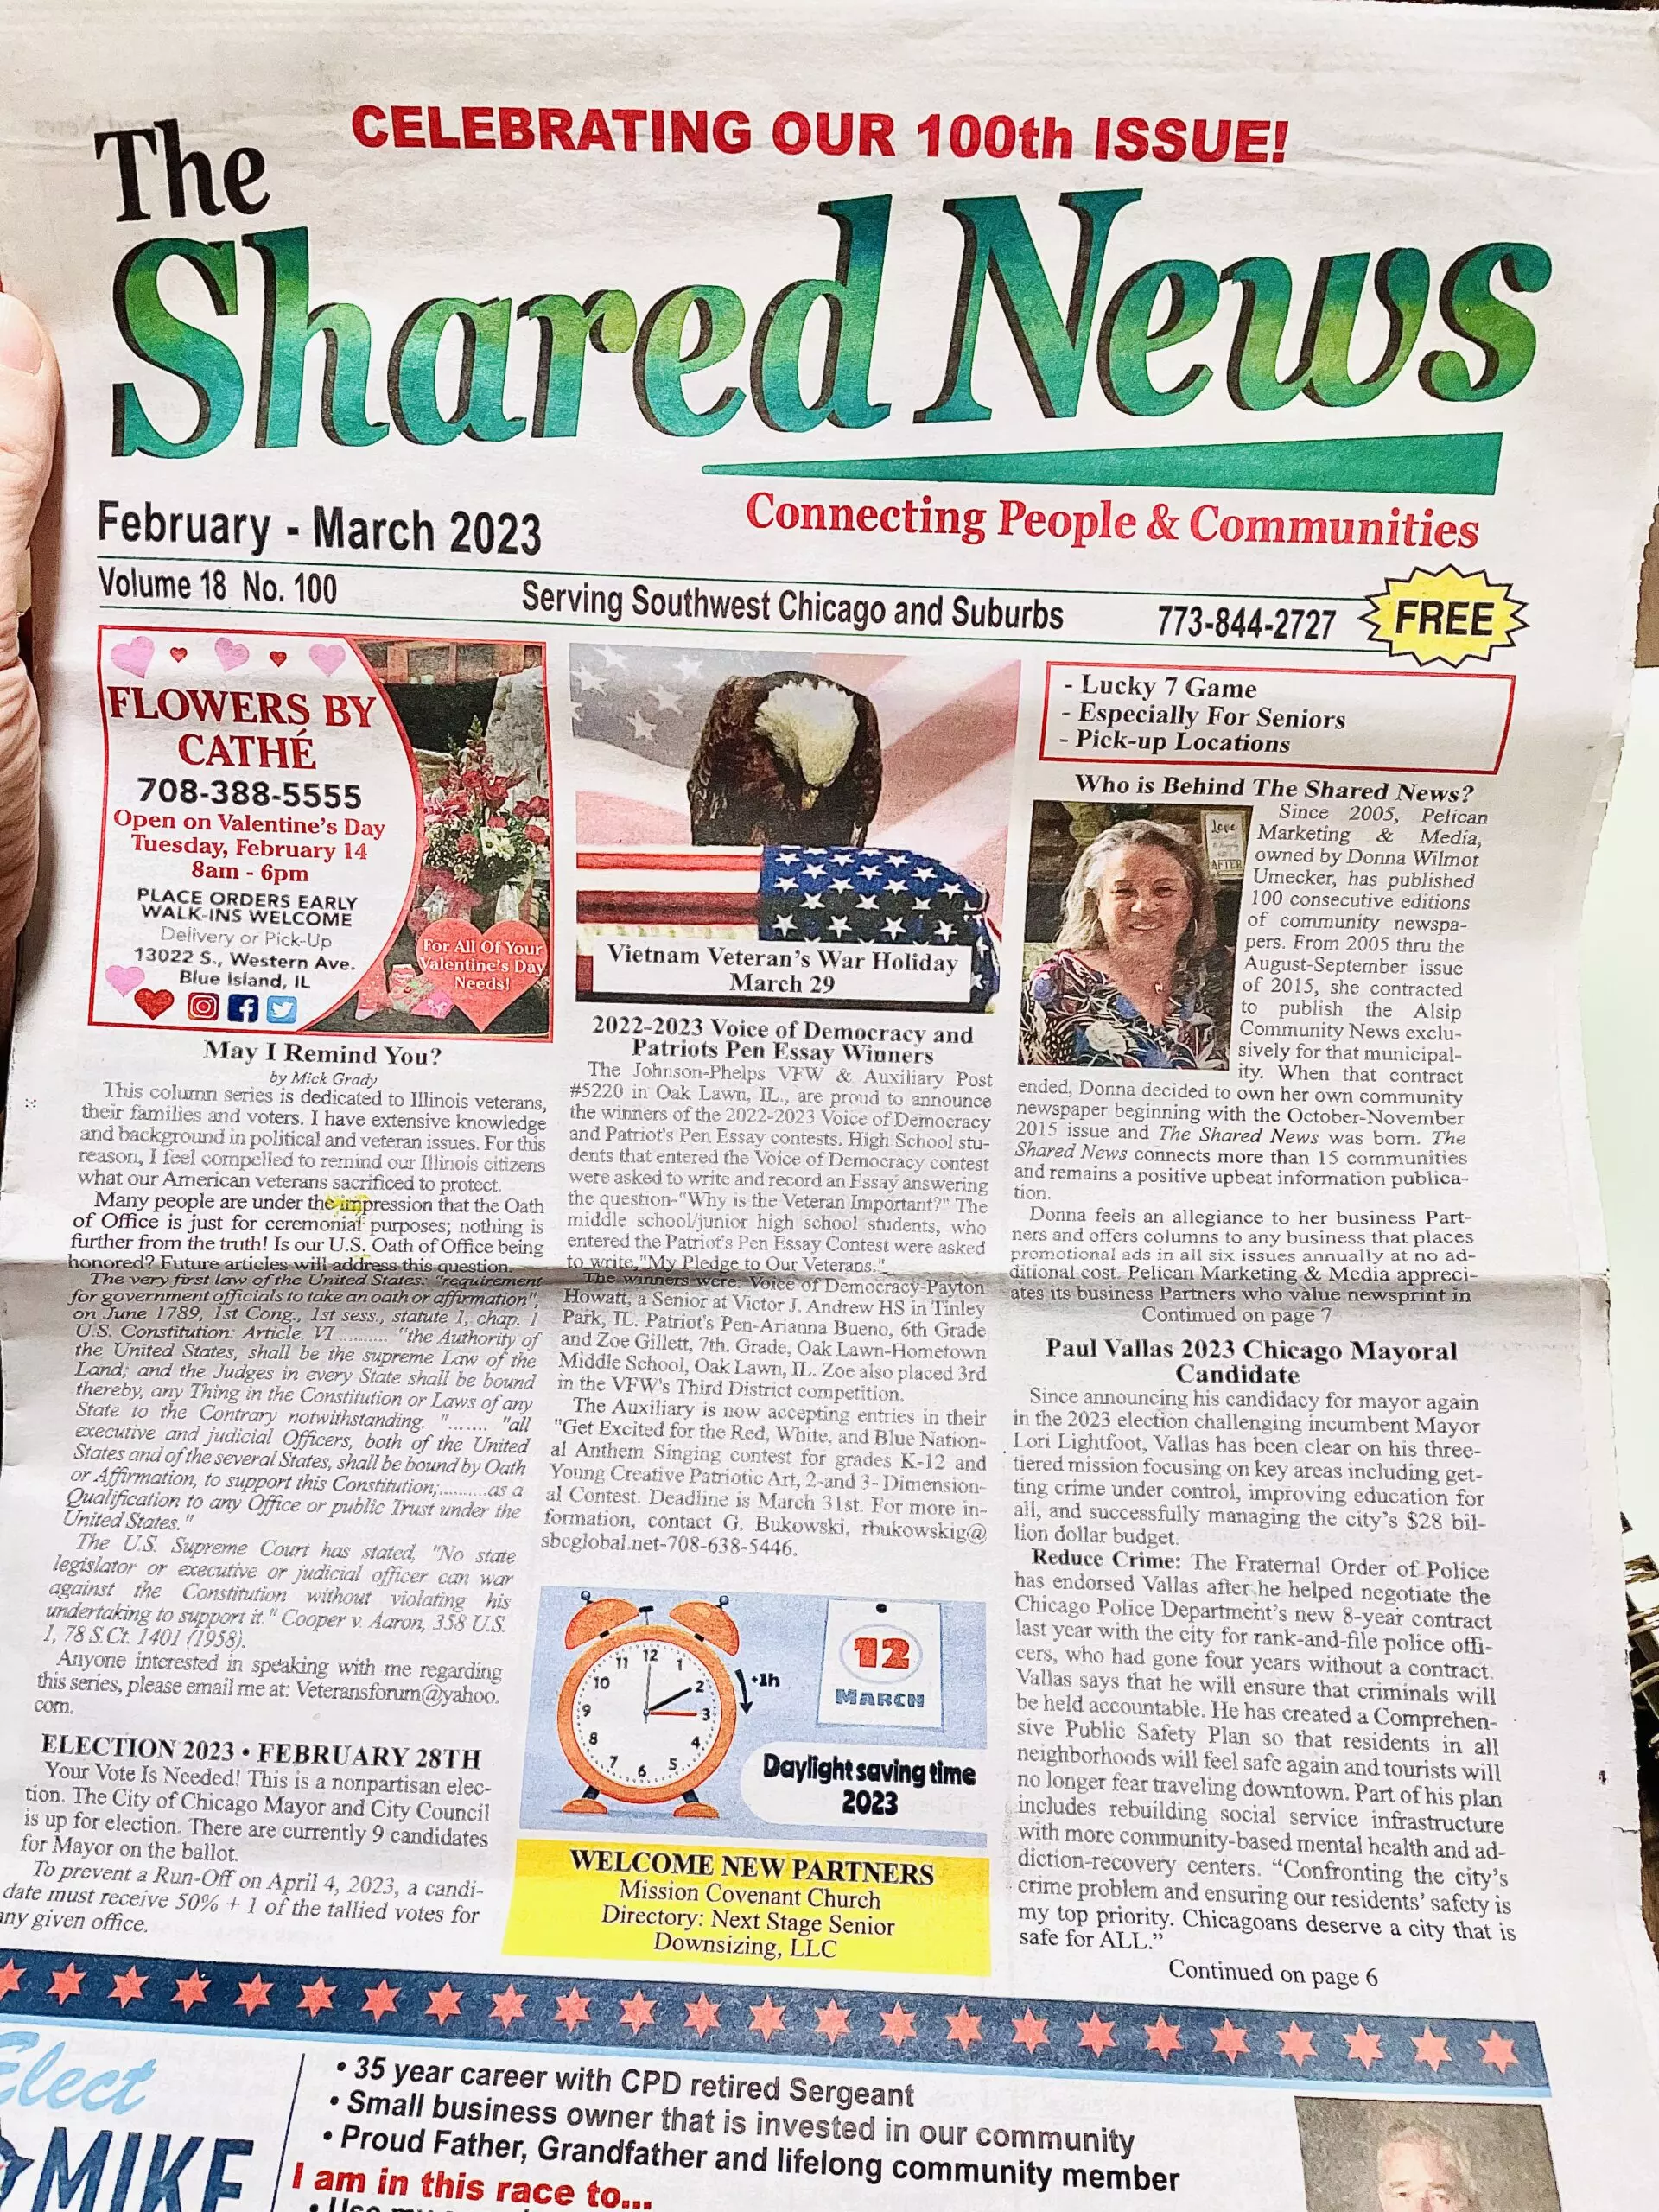 About Woman-Owned Chicago South Suburban Newspaper: The Shared News